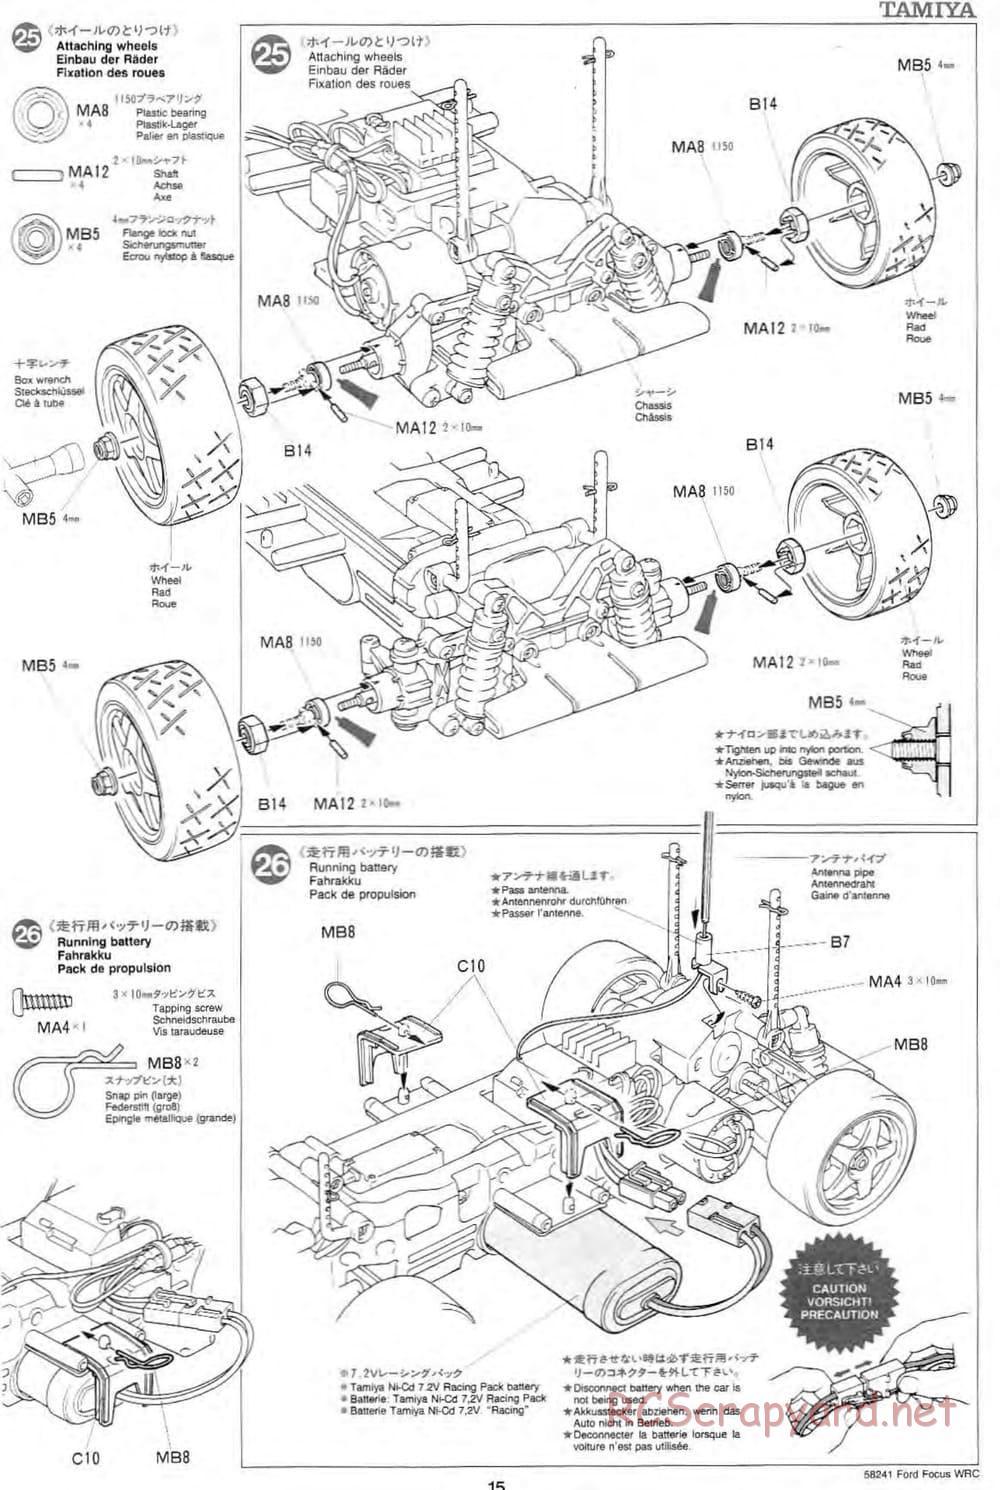 Tamiya - Ford Focus WRC - TL-01 Chassis - Manual - Page 15